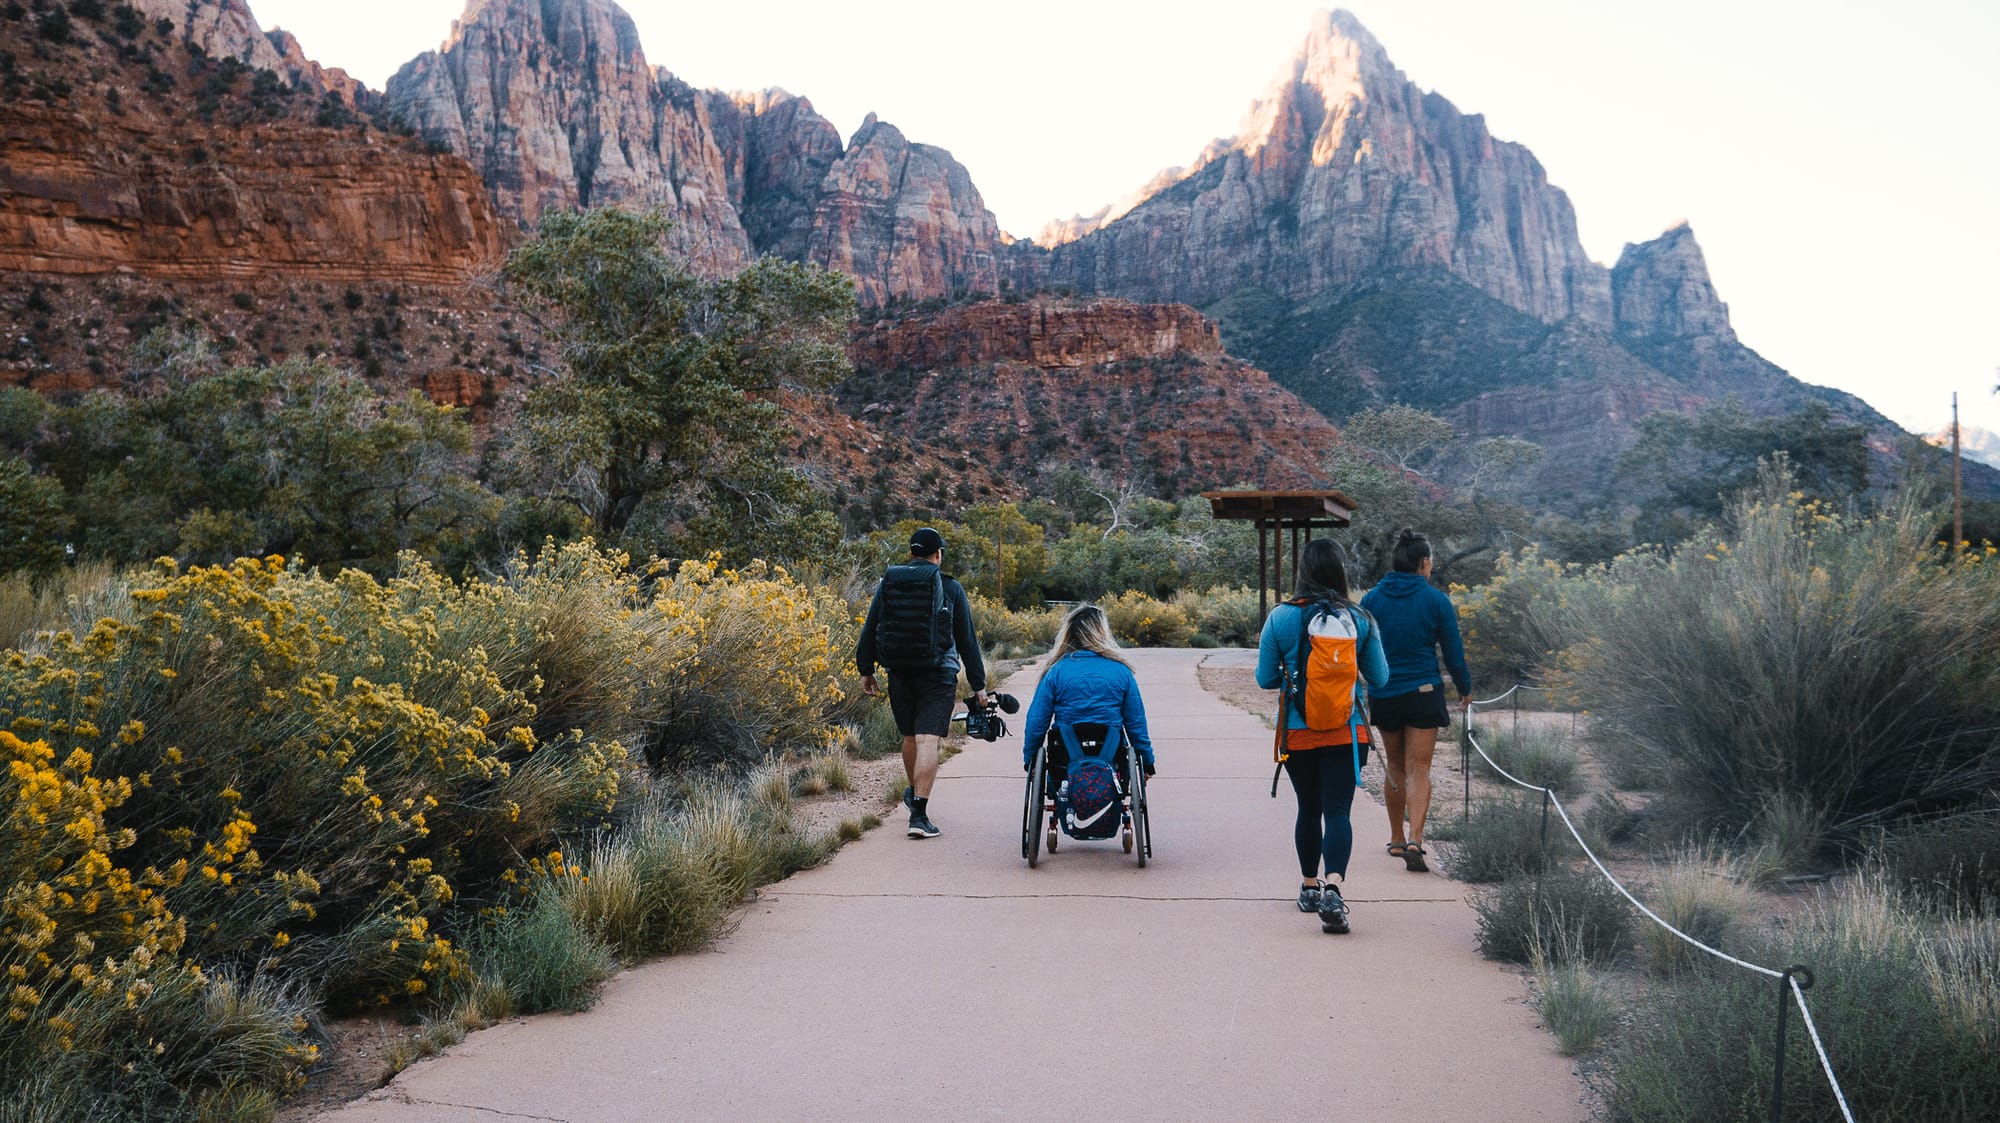 Wheelchair user enjoying accessible paths in Zion National Park. You can plan accessible trips here with Wheel the World